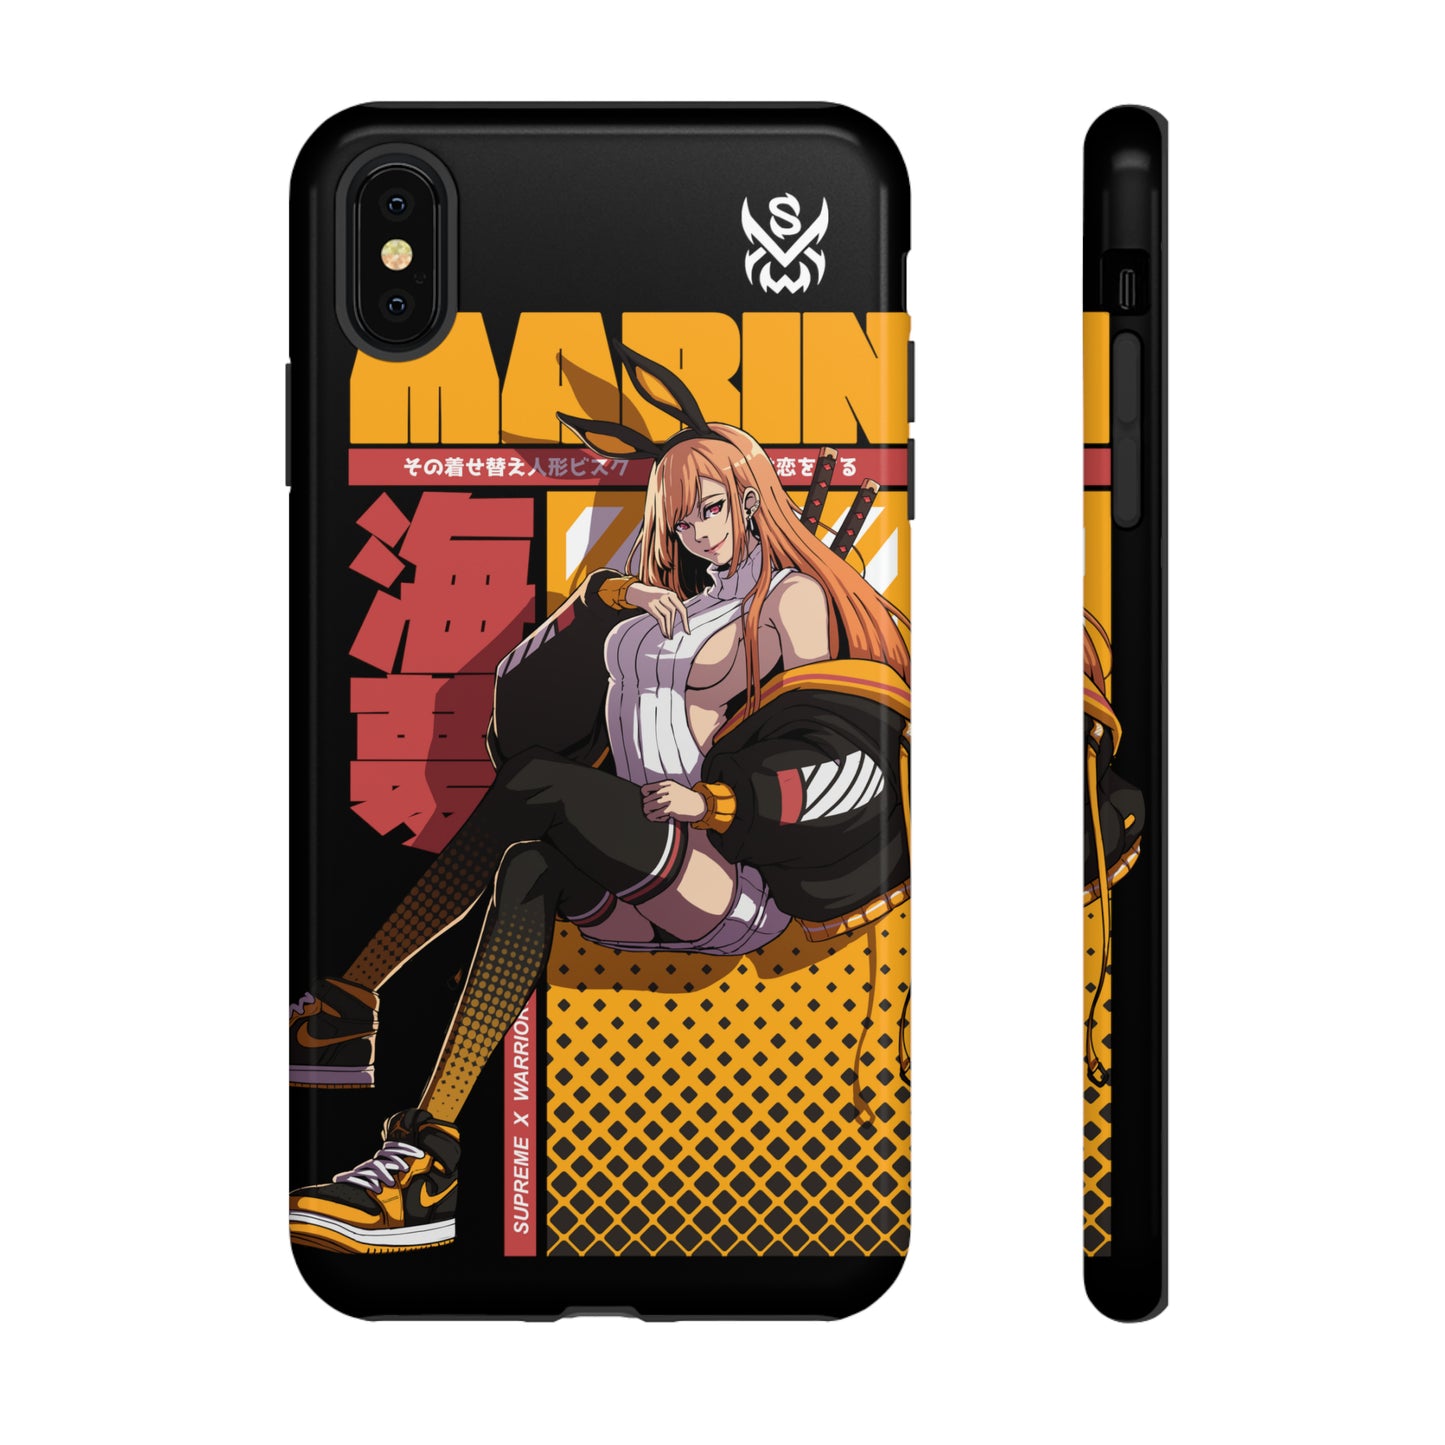 Marin / iPhone Case - LIMITED